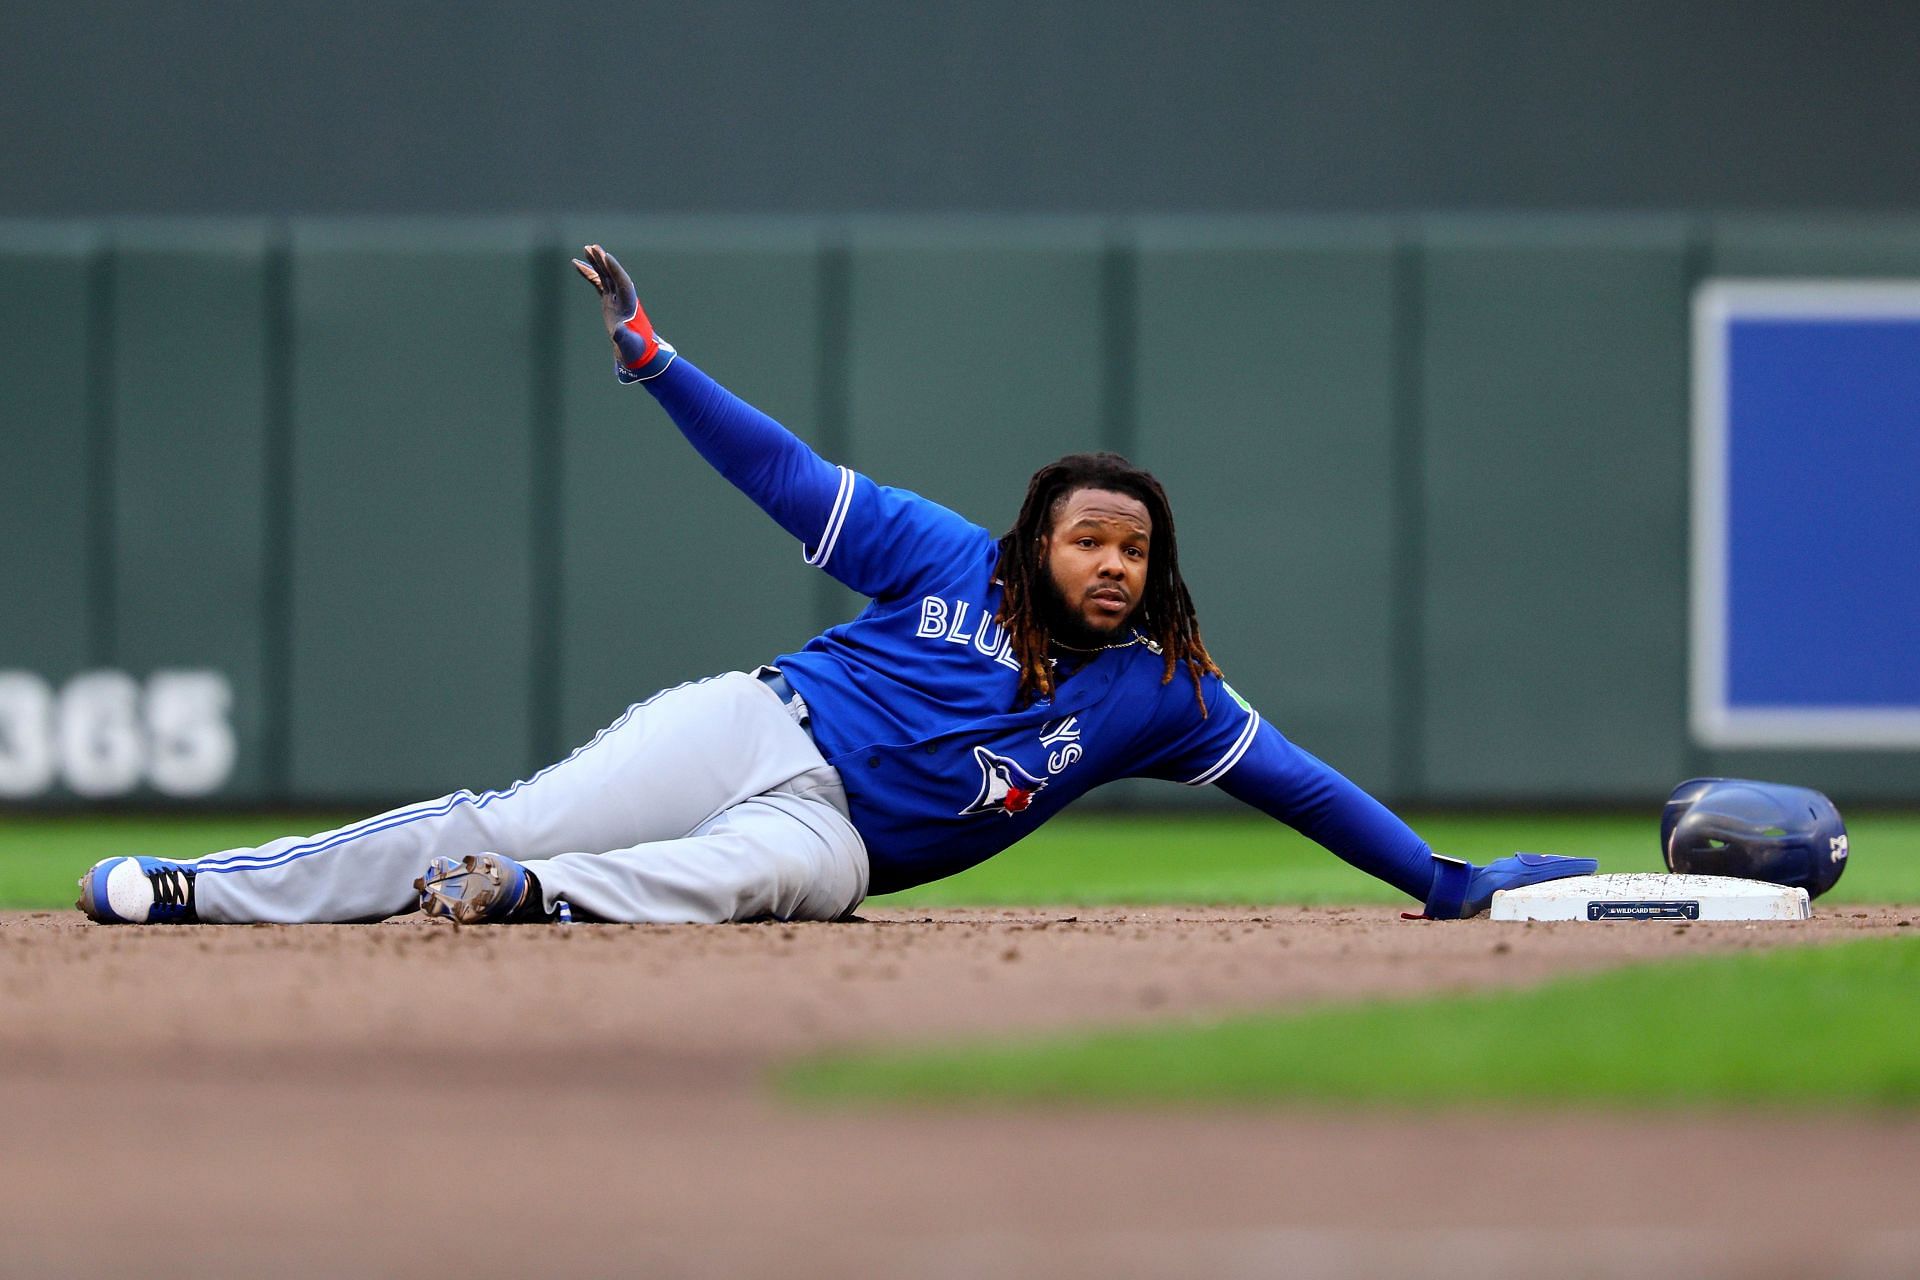 Can the Blue Jays make the playoffs?